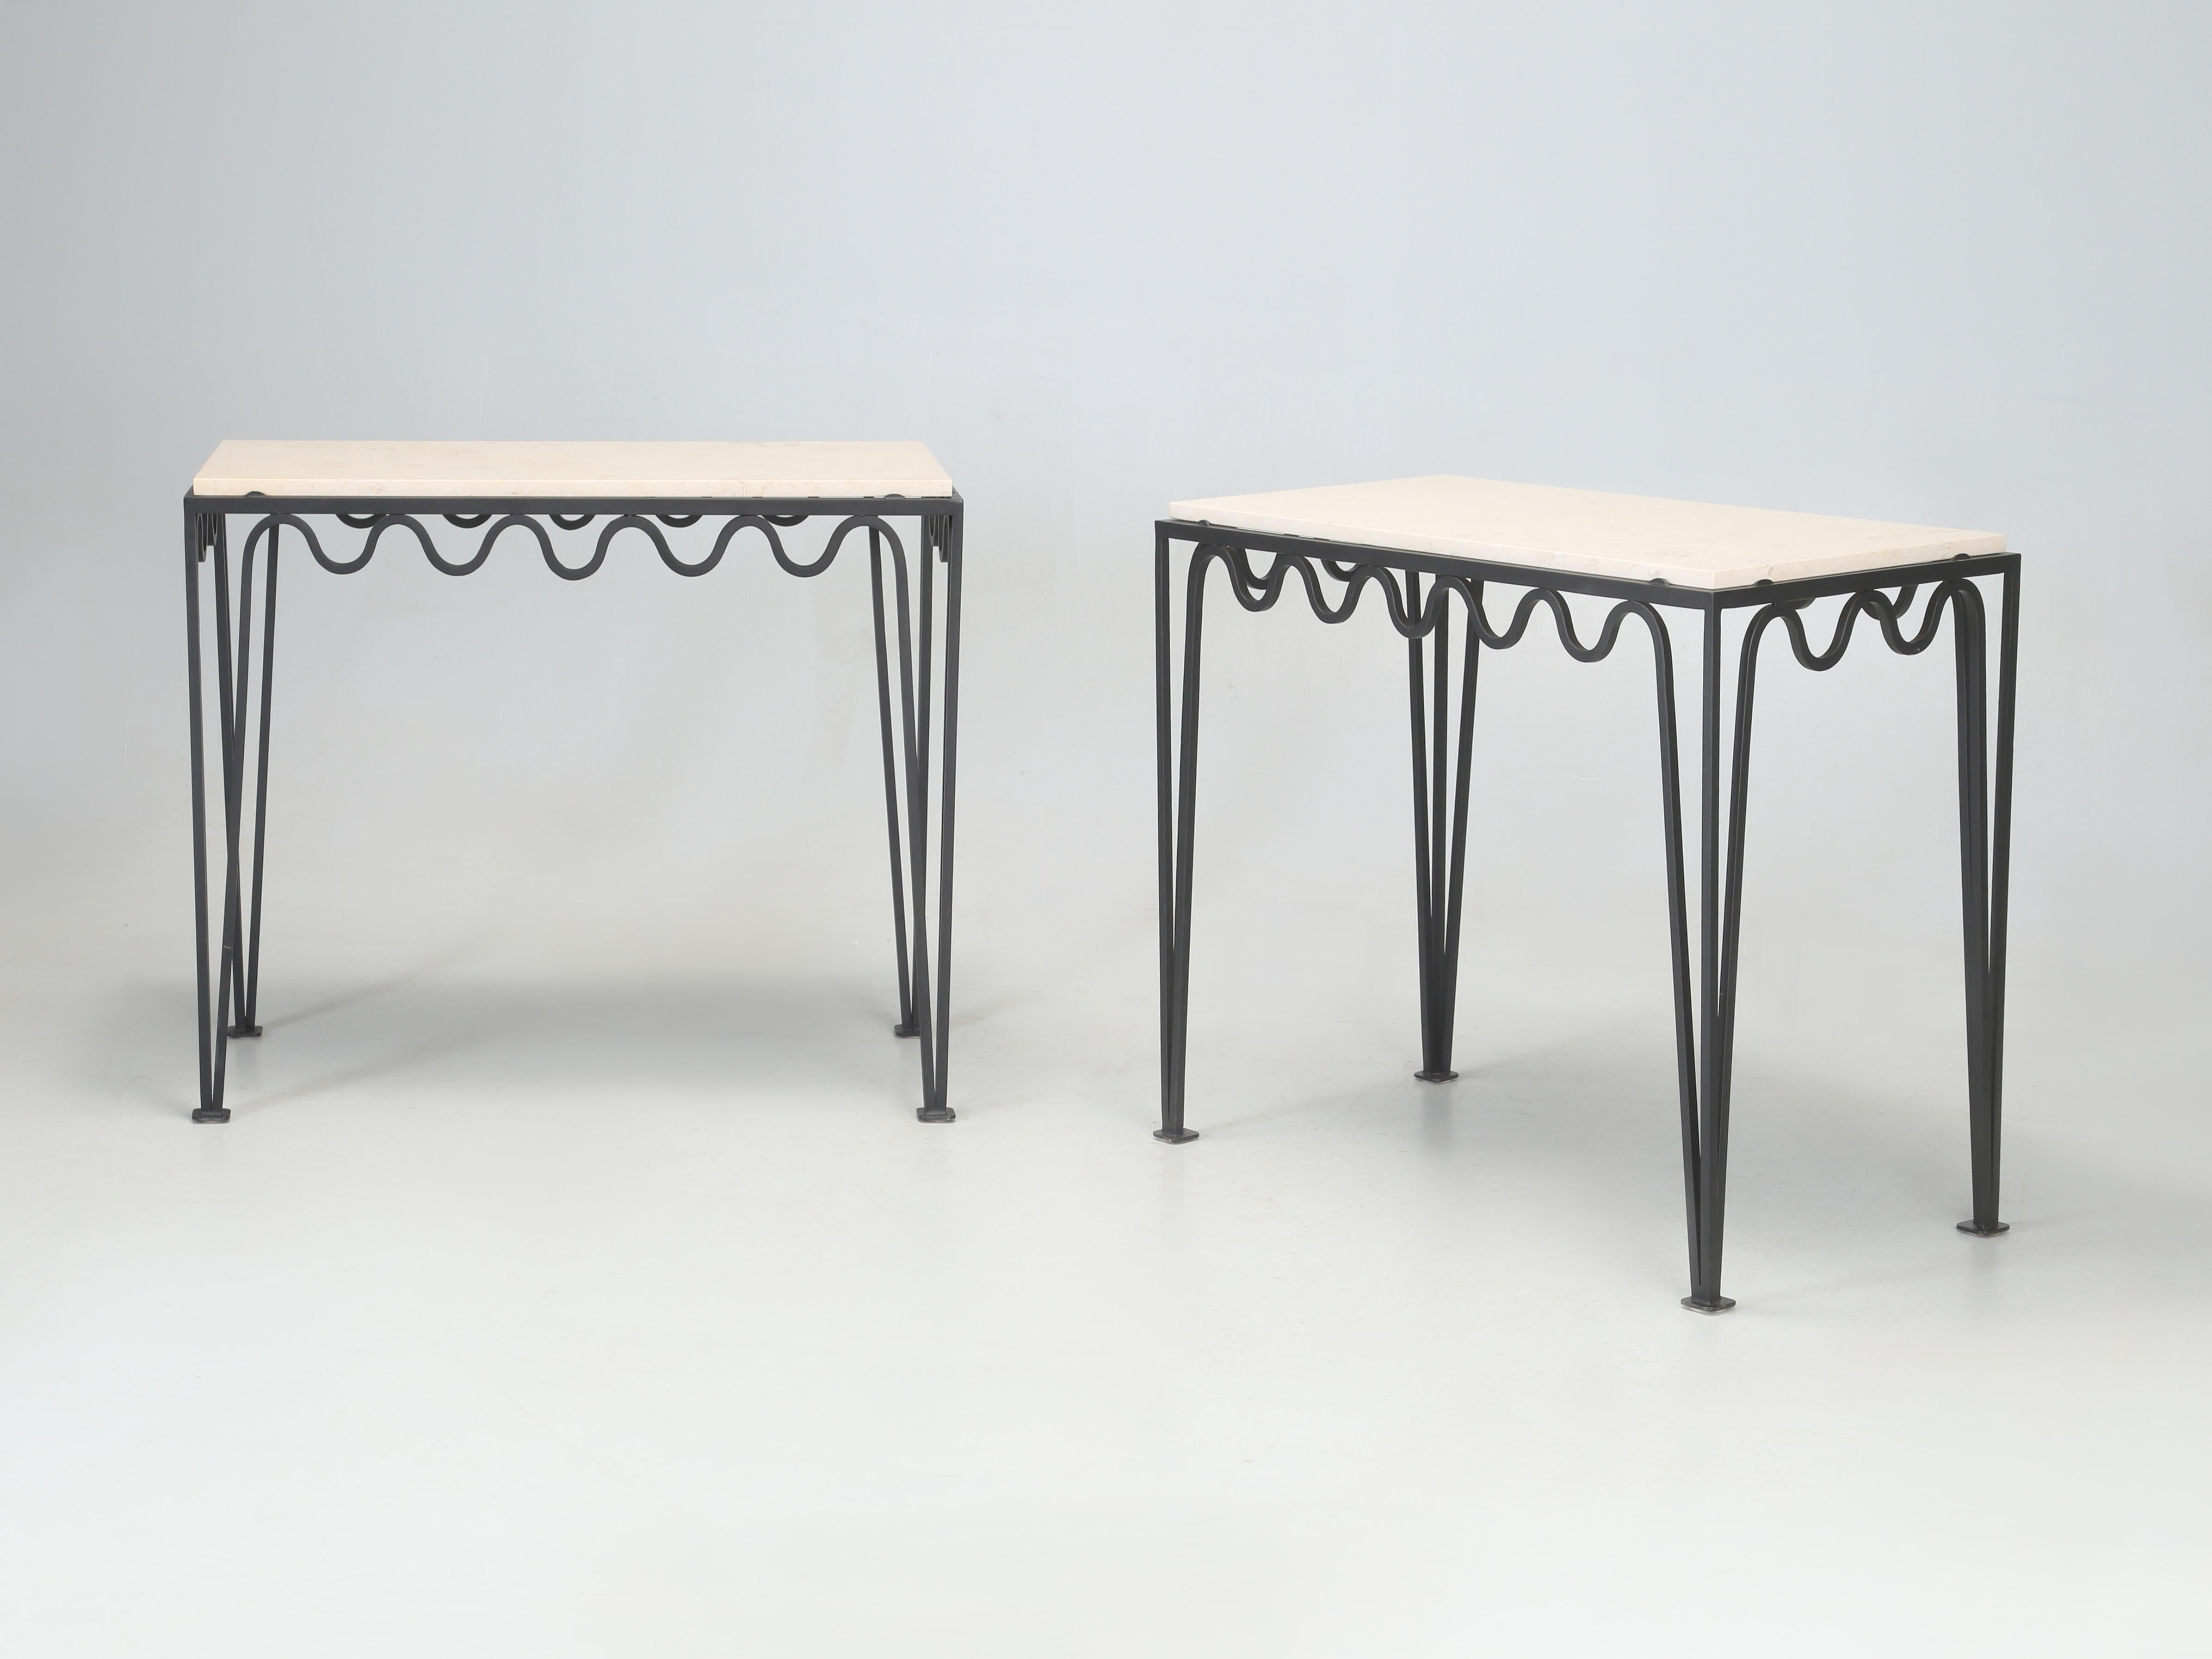 Pair of Undulating 'Méandre' Wrought Iron Console Tables fitted with Limestone tops. These were made in France and custom ordered without the standard glass top surfaces and were replaced with a Classic Limestone, which adds not only practicality,